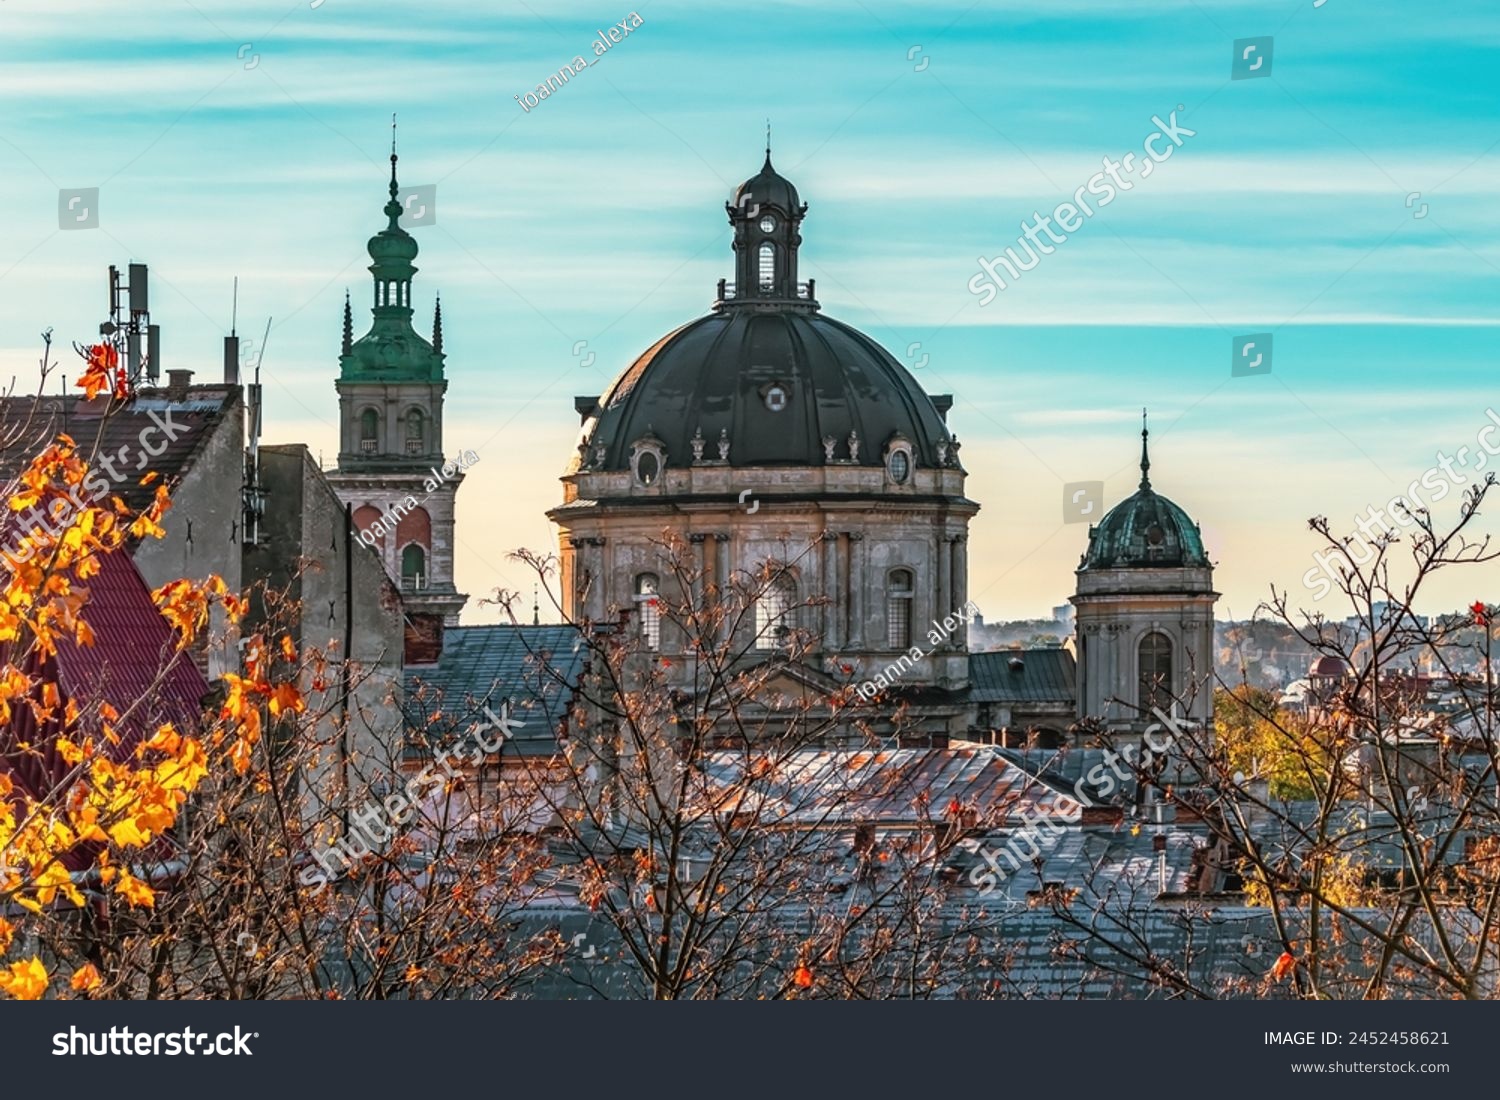 Dormition Church tower and Dominican Church dome in Lviv, Ukraine. Close-up of city roofs against the backdrop of bare tree branches on an autumn morning #2452458621